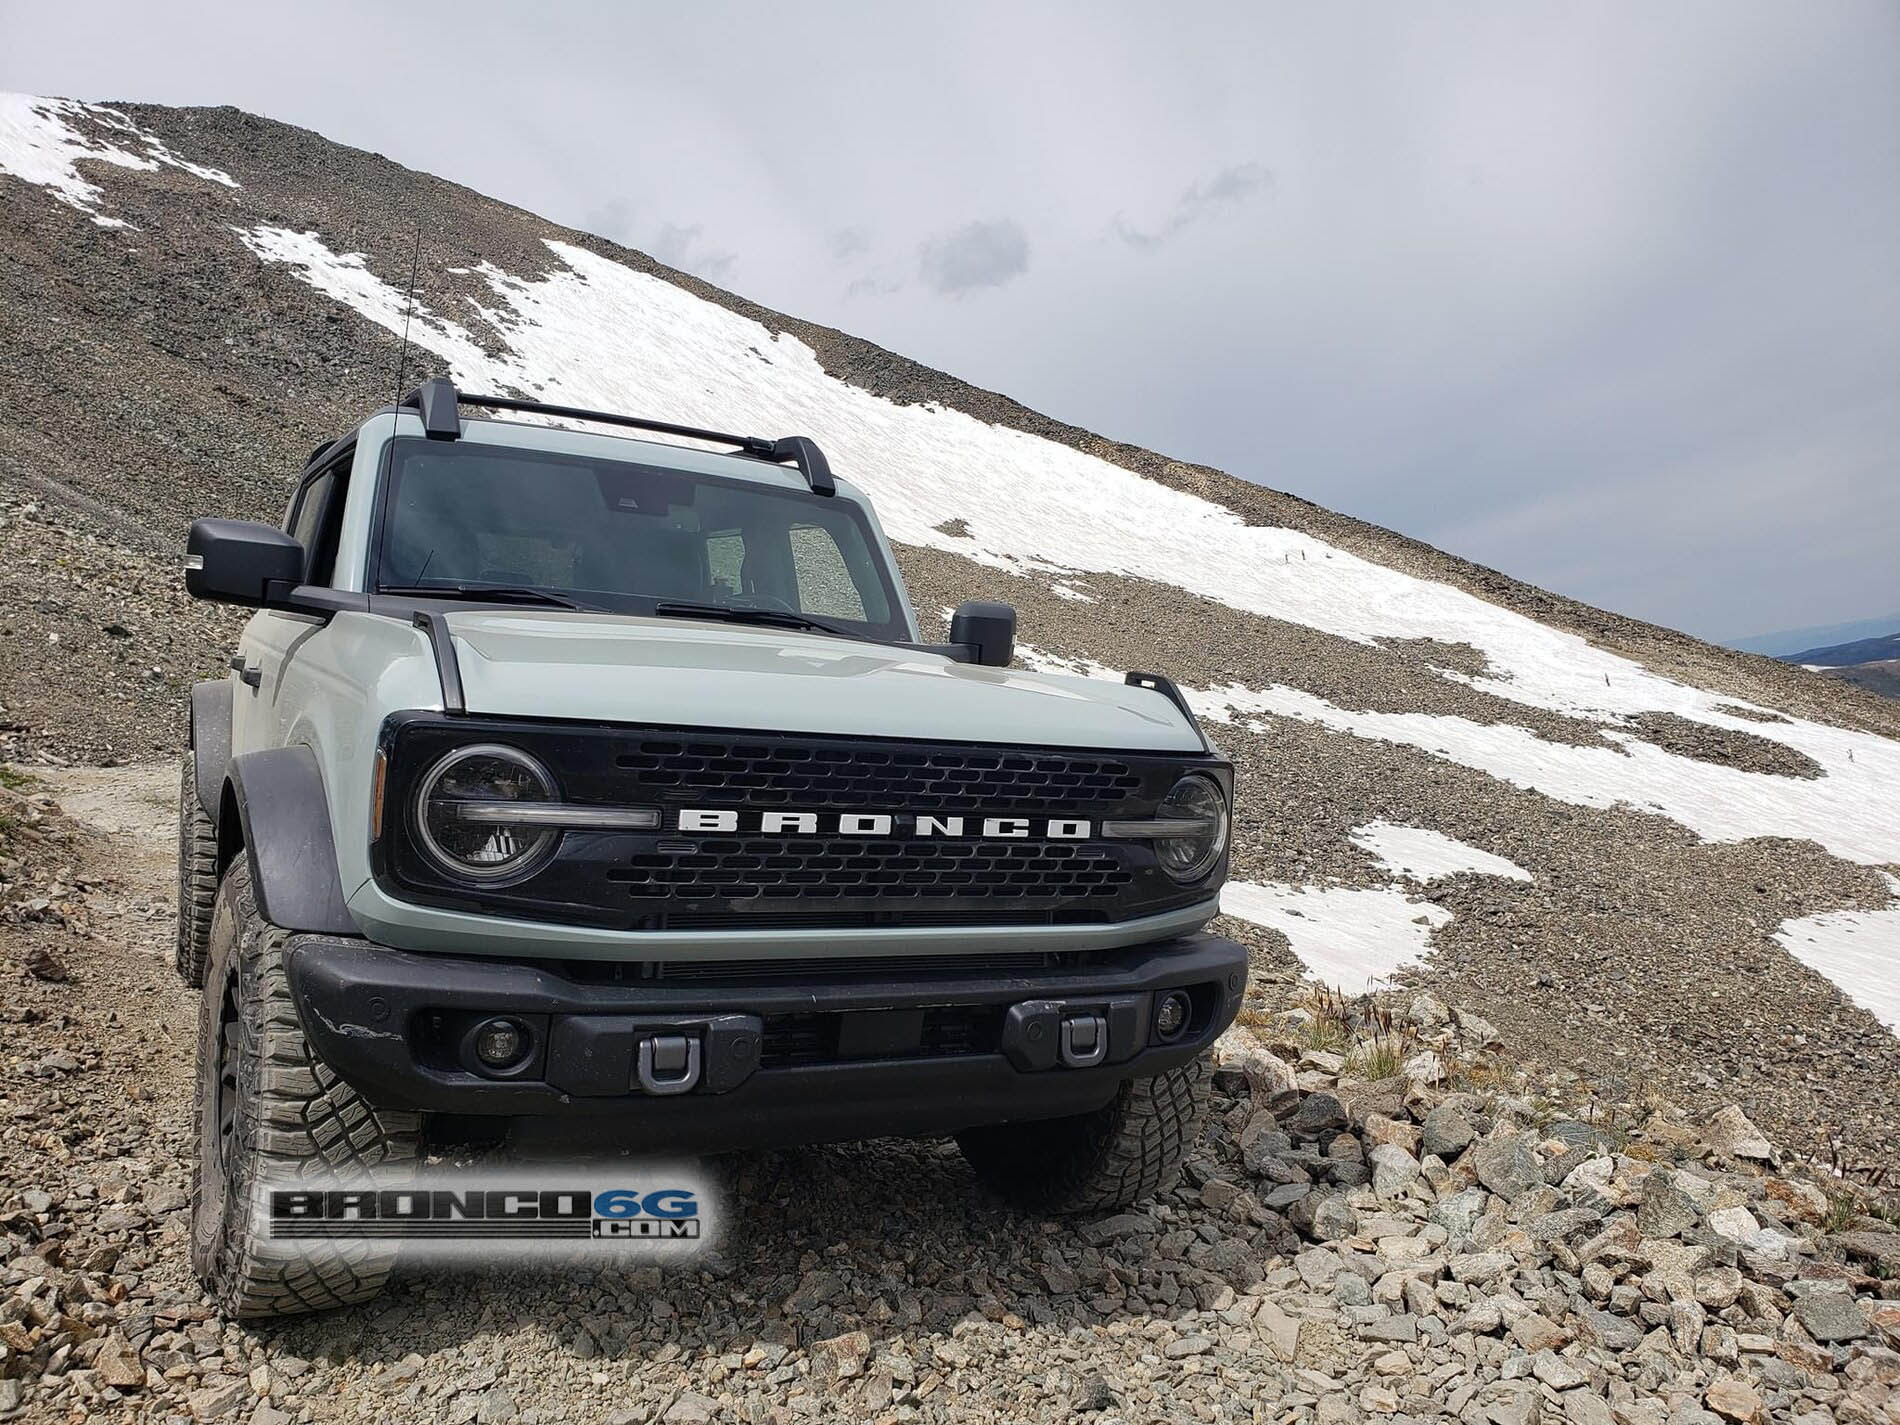 Ford Bronco Spotted: Cactus Gray and Black Broncos testing in Colorado mountains Cactus Gray Ford Bronco Testin